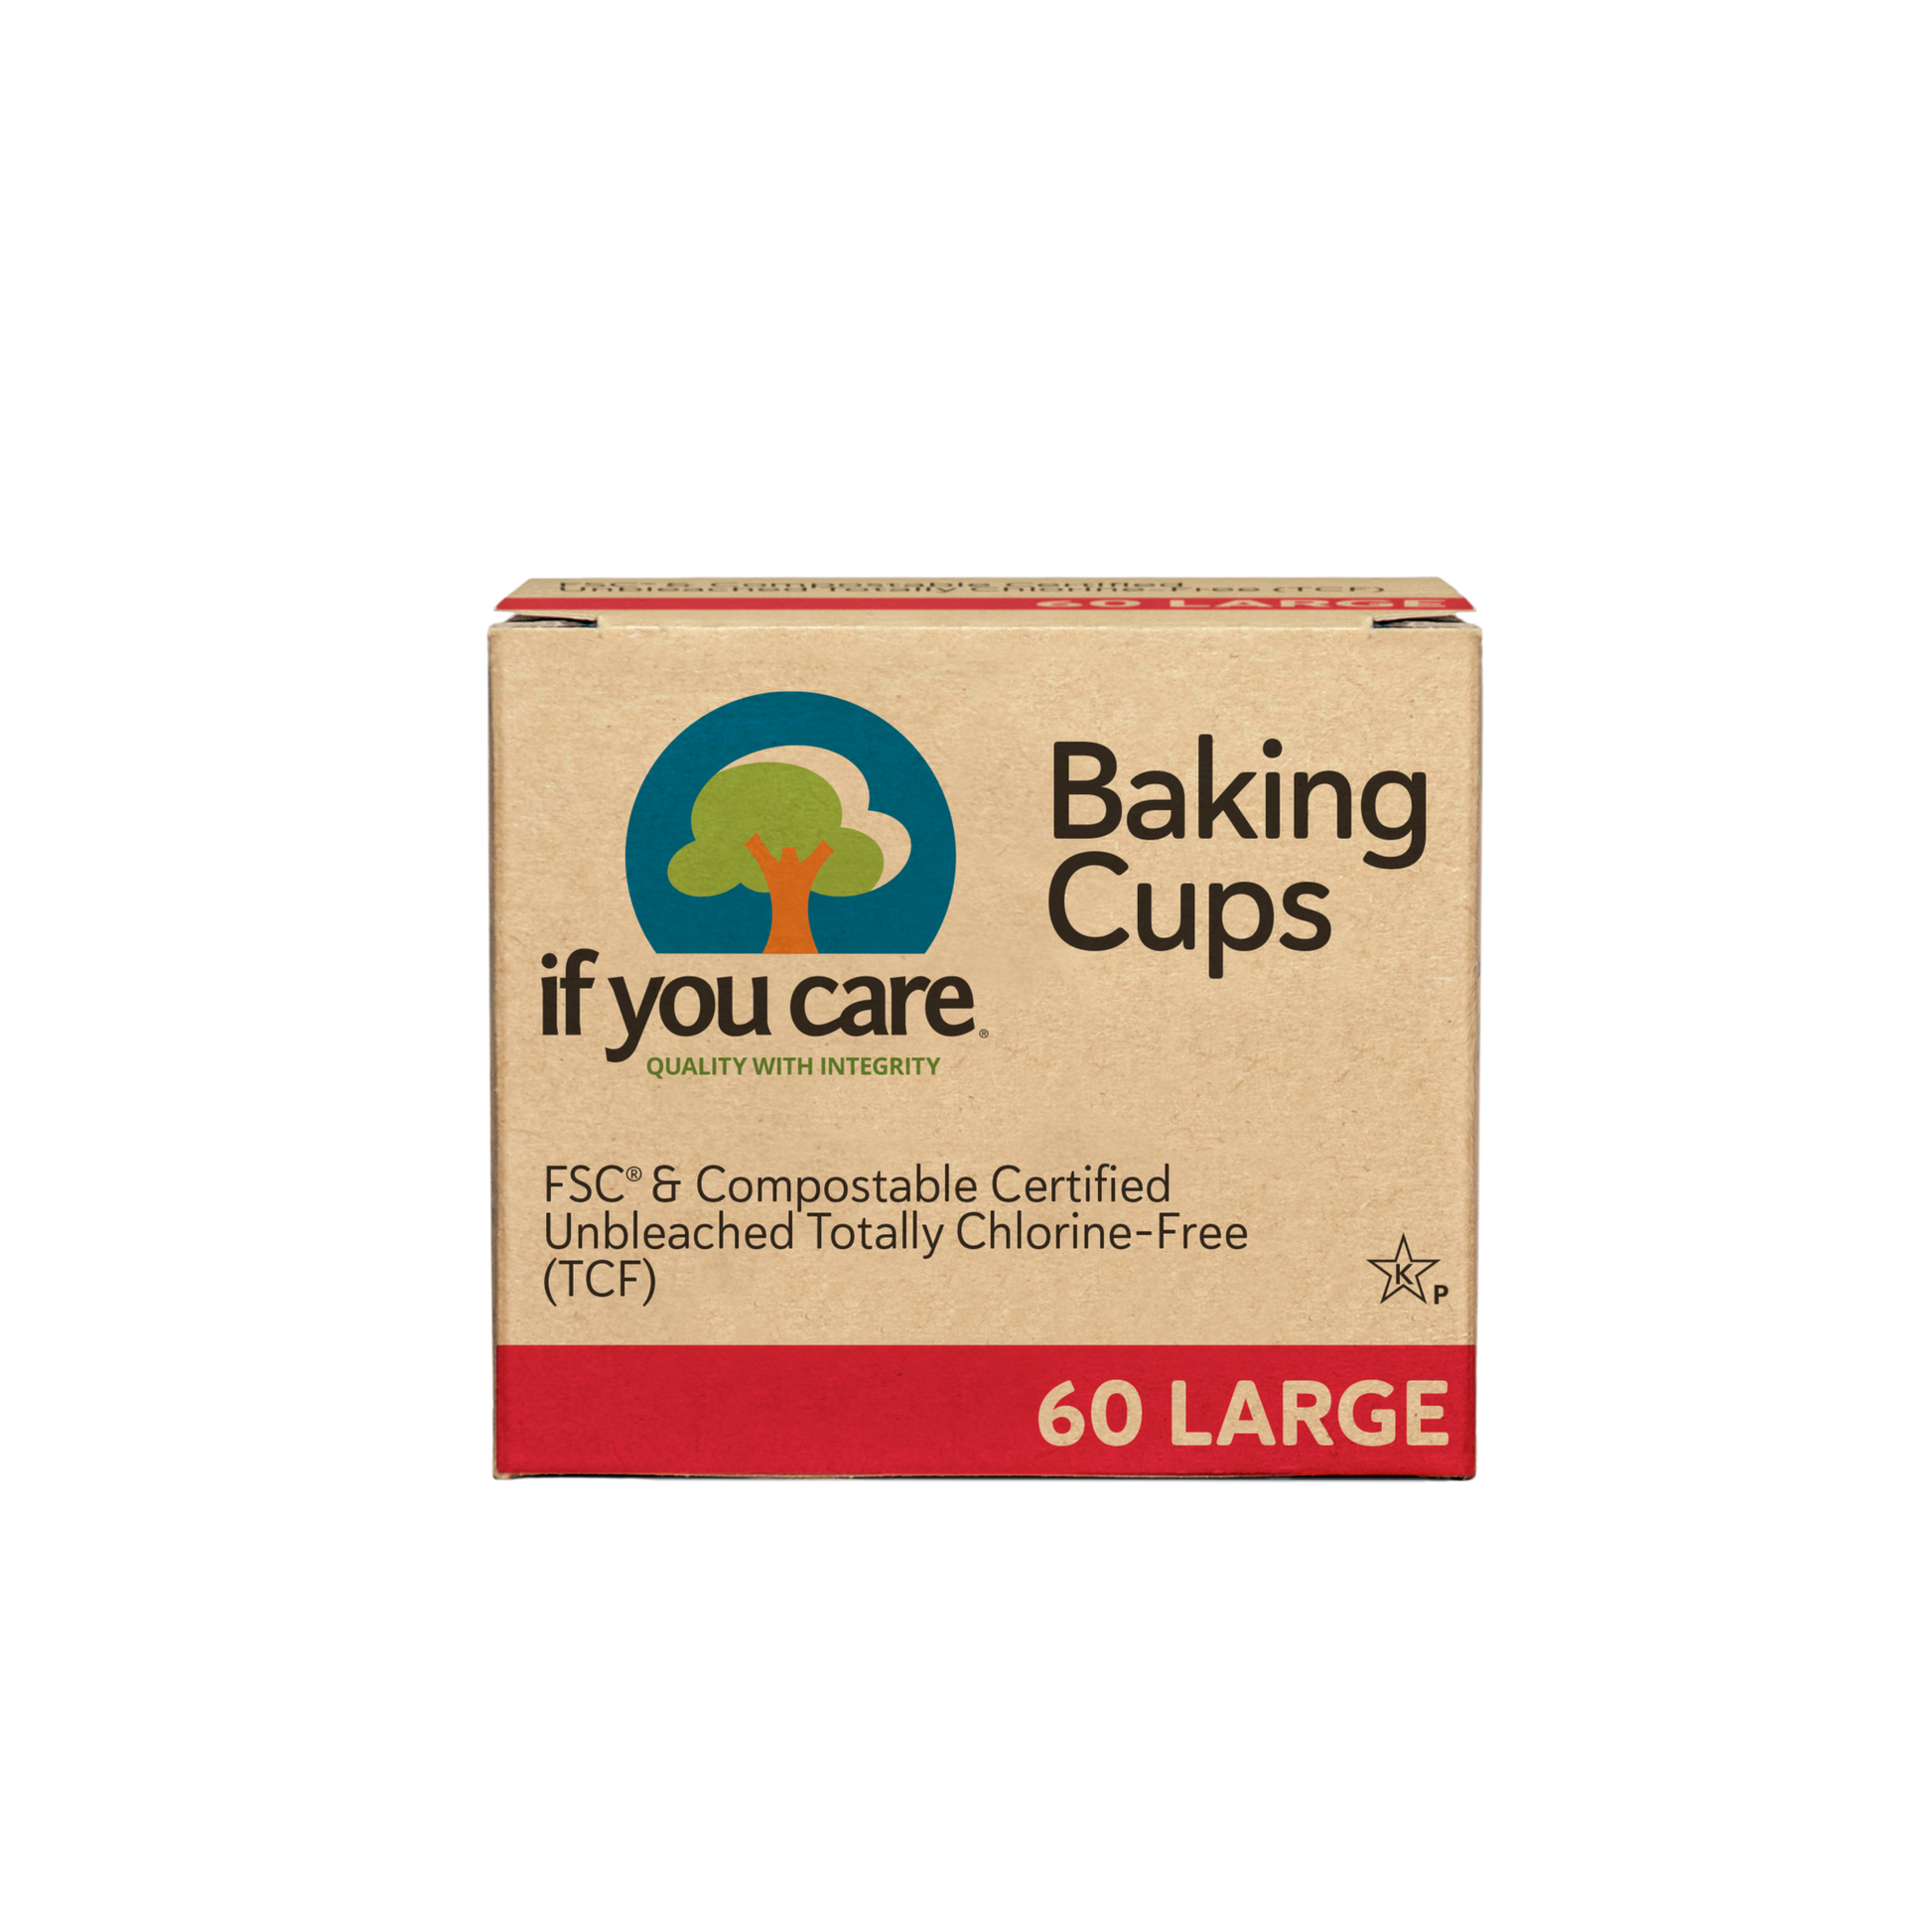 If You Care - Fsc Certified Large Baking Cups If You Care